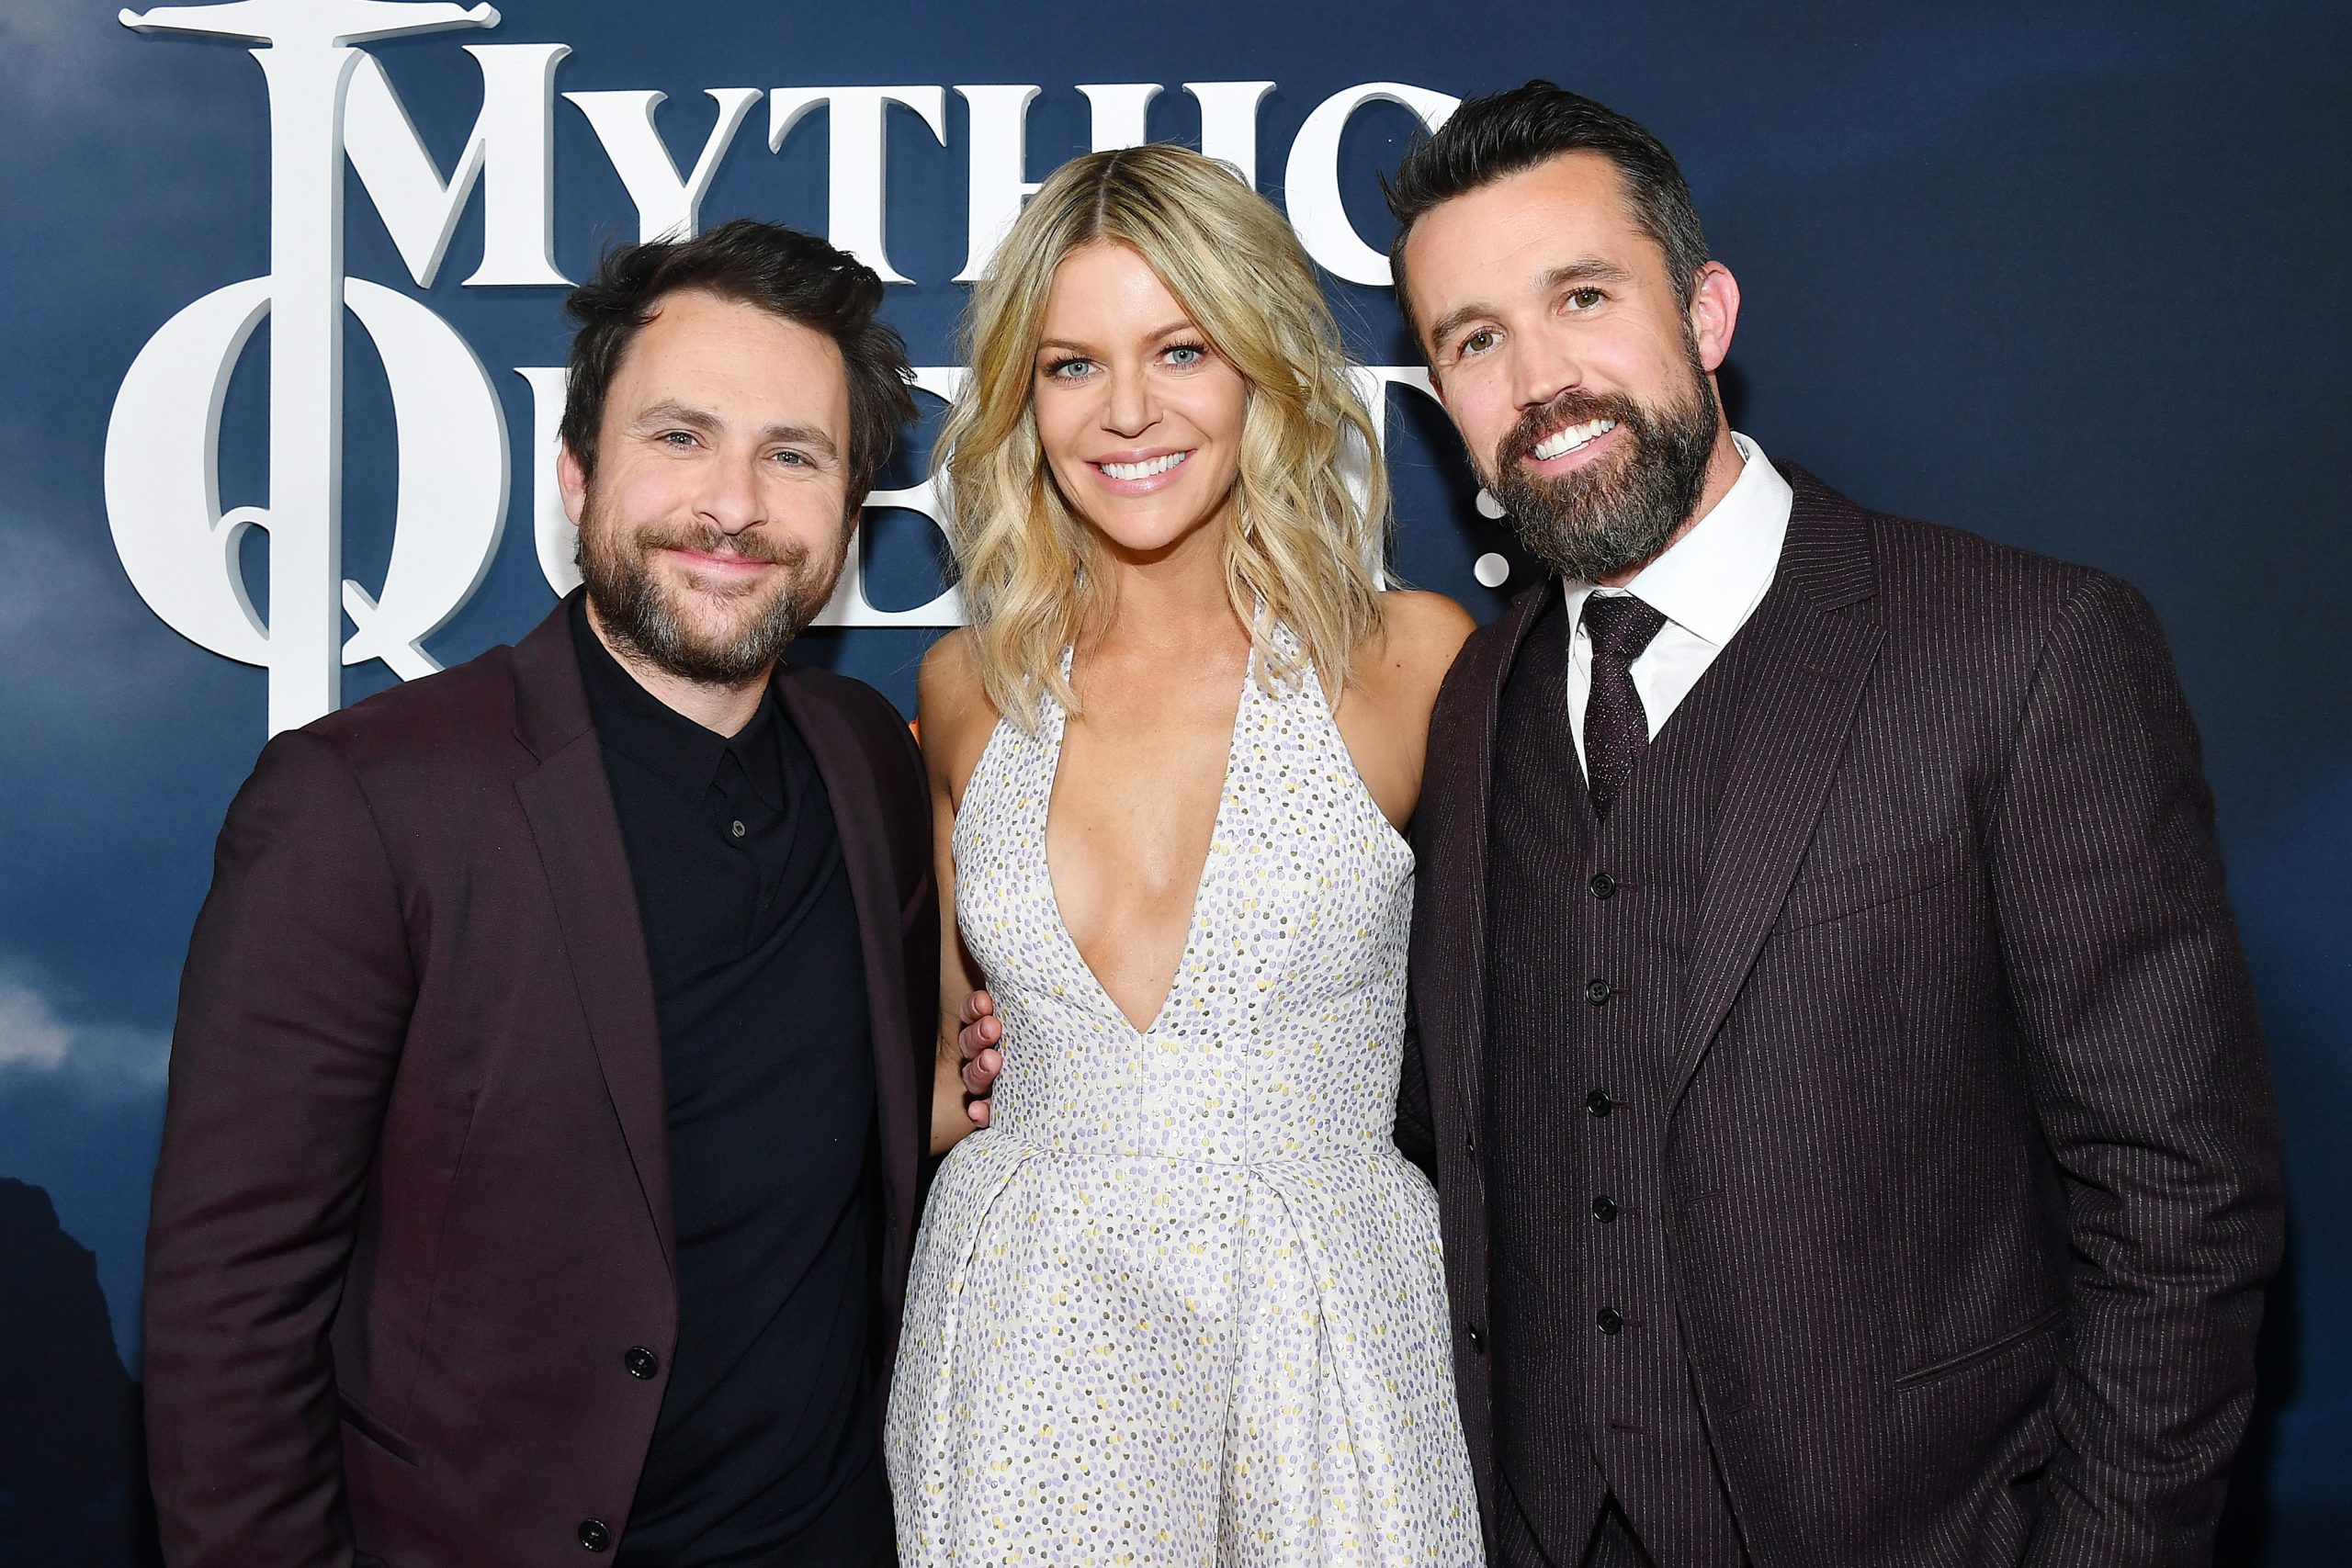 Charlie Day, Kaitlin Olson. and Rob McElhenney of It's Always Sunny in Philadelphia